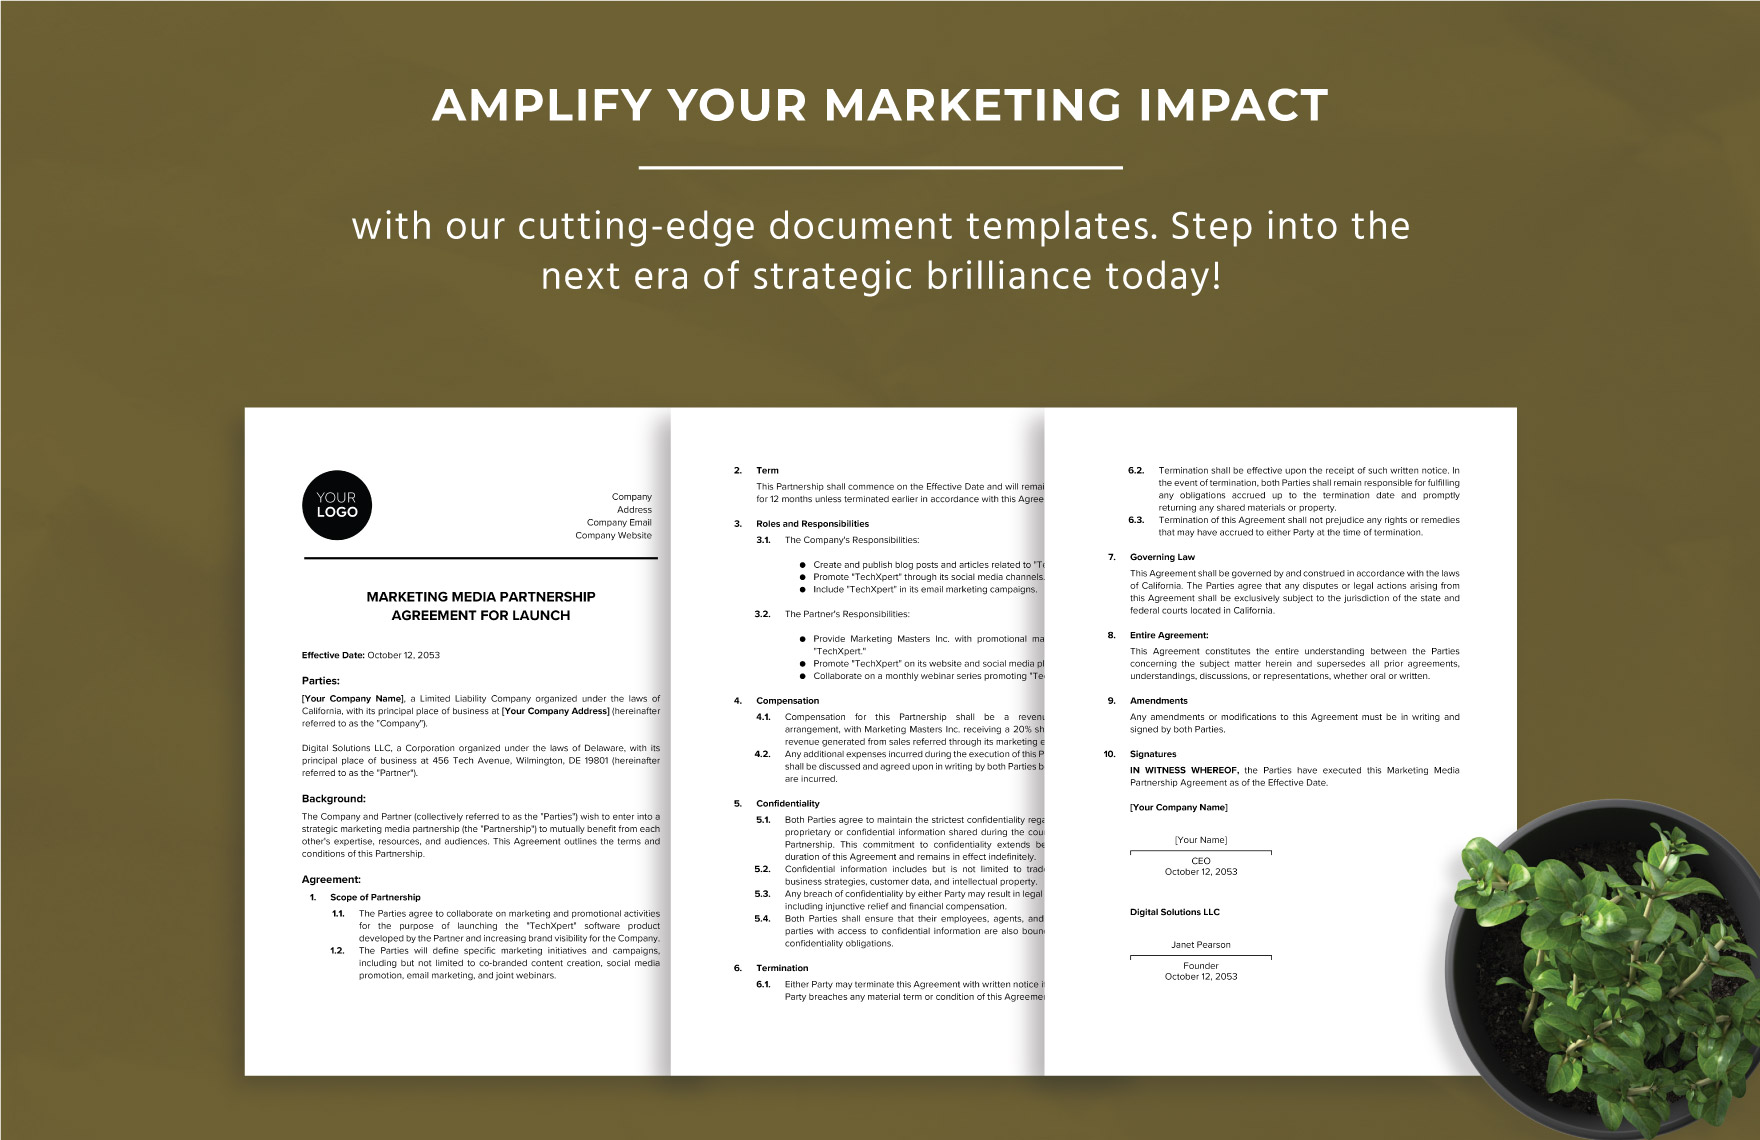 Marketing Media Partnership Agreement for Launch Template